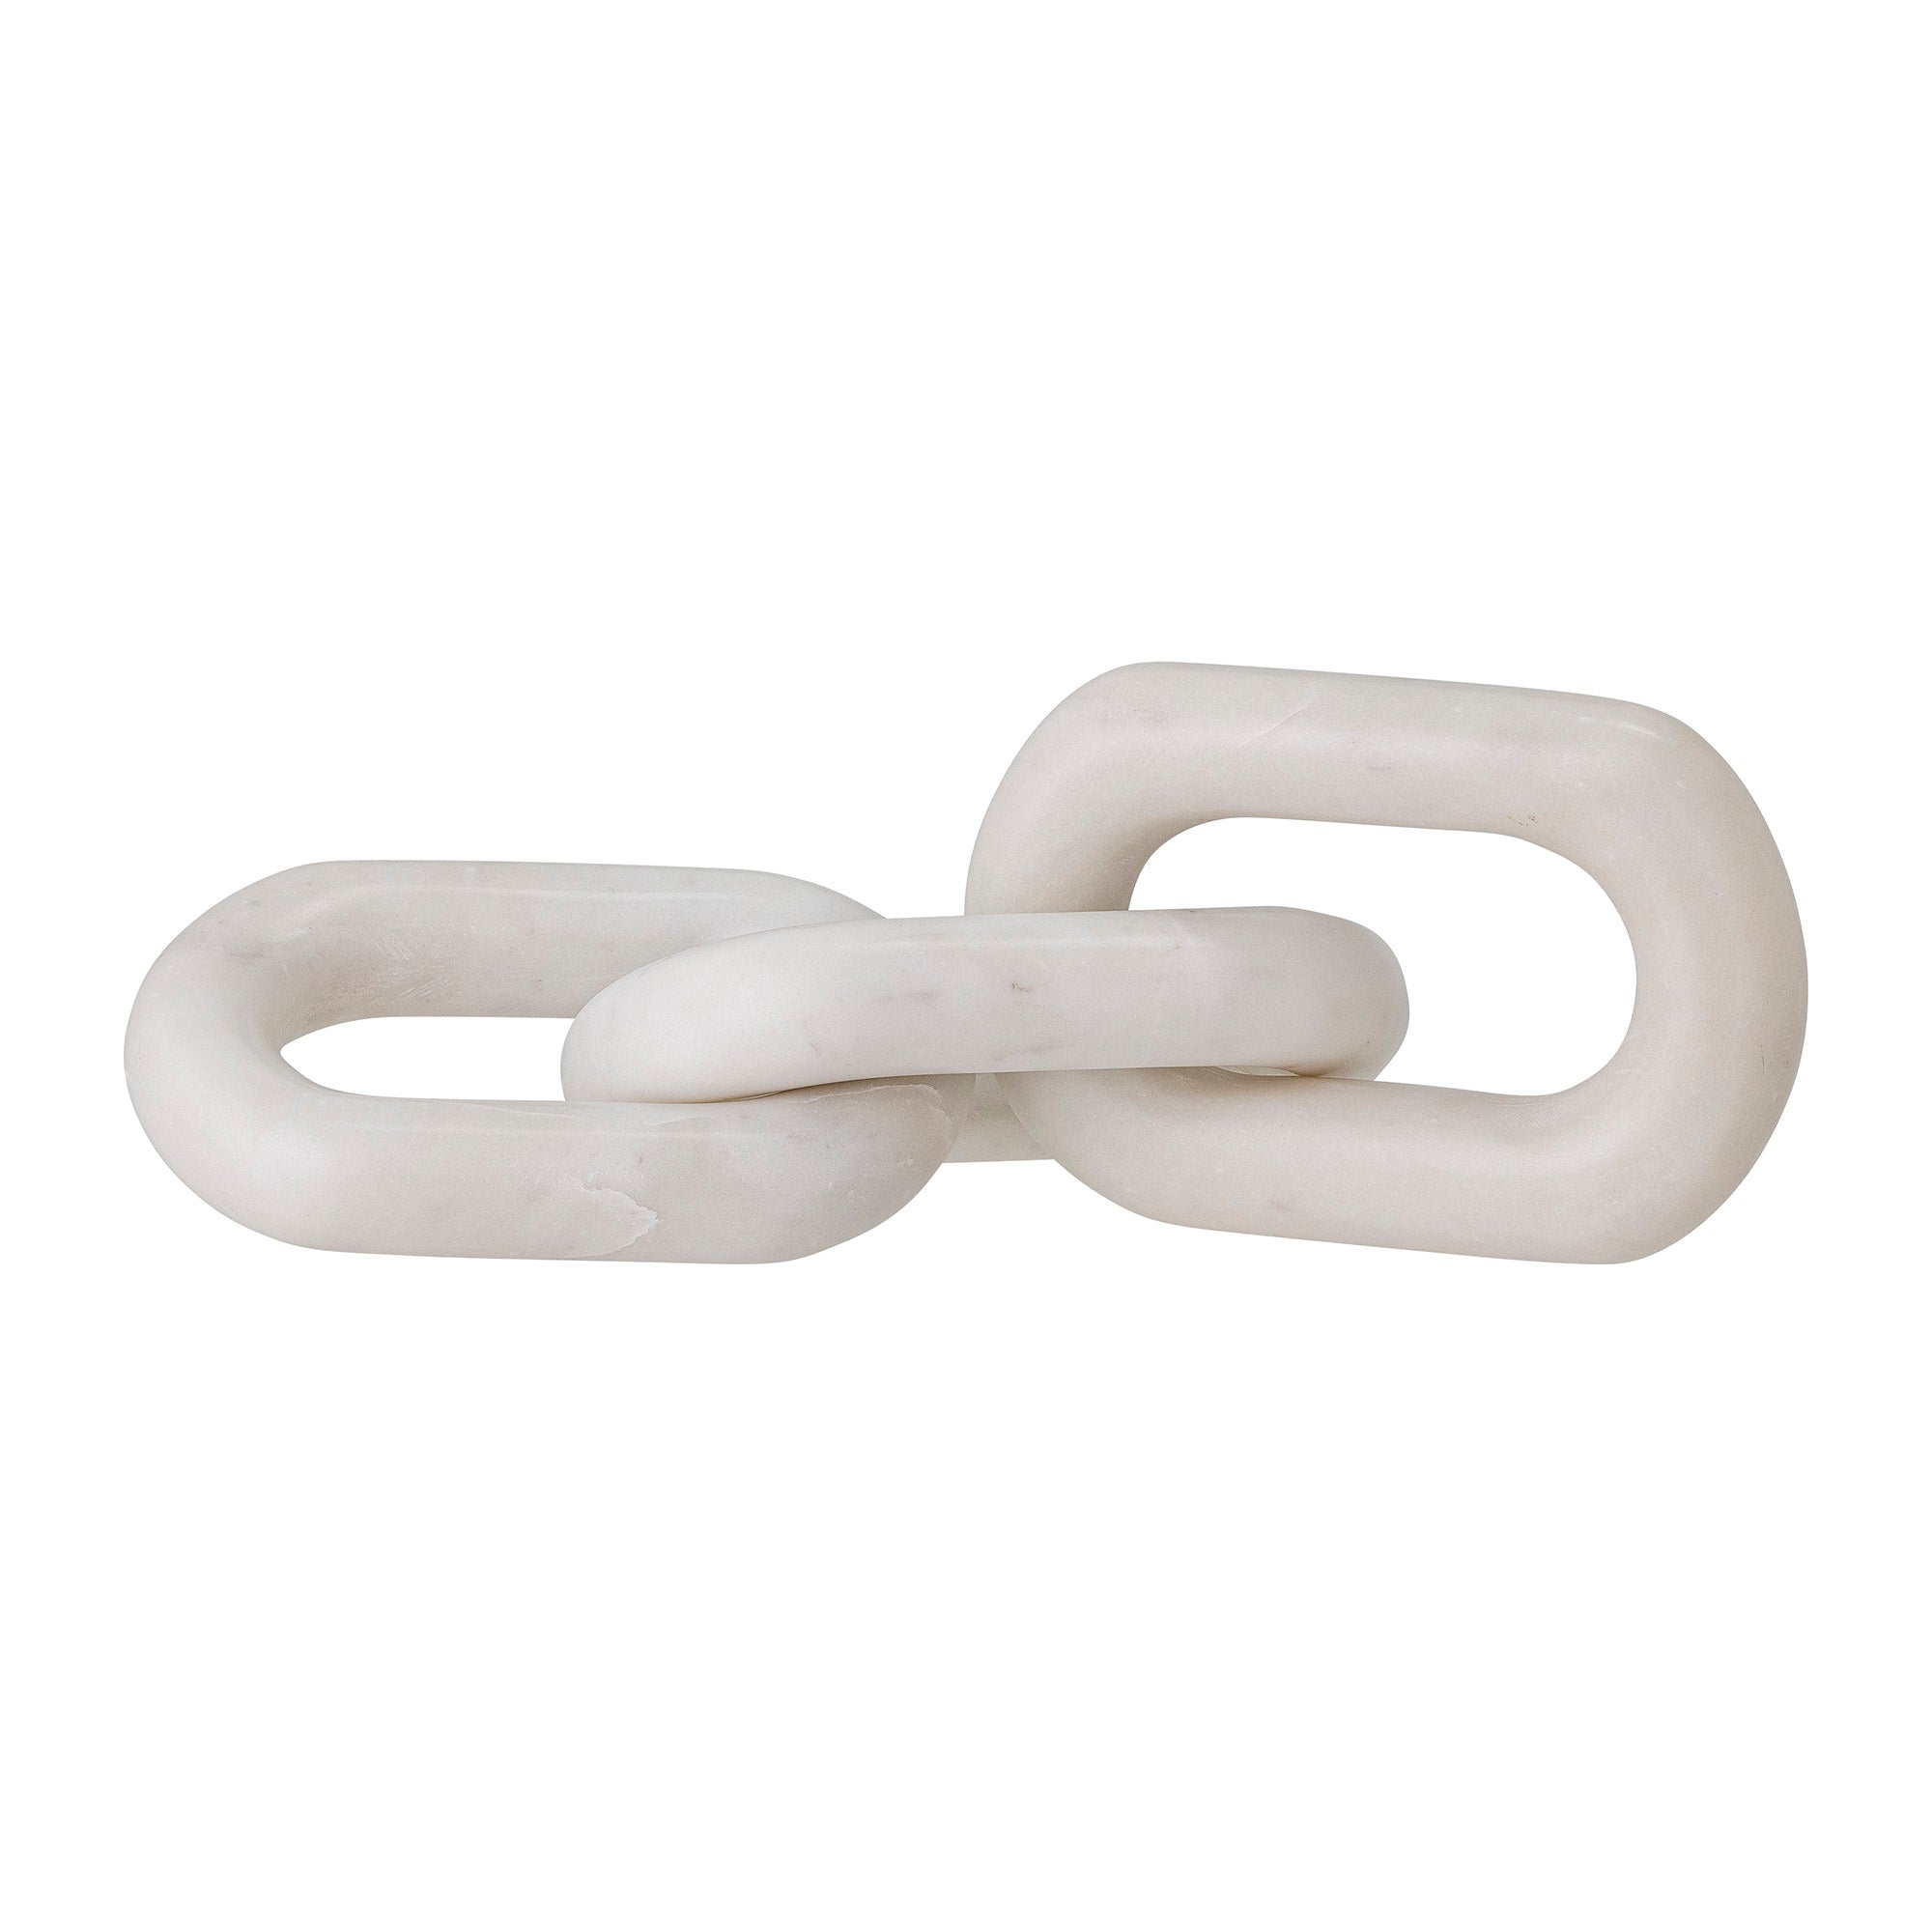 Figurine knot white marble